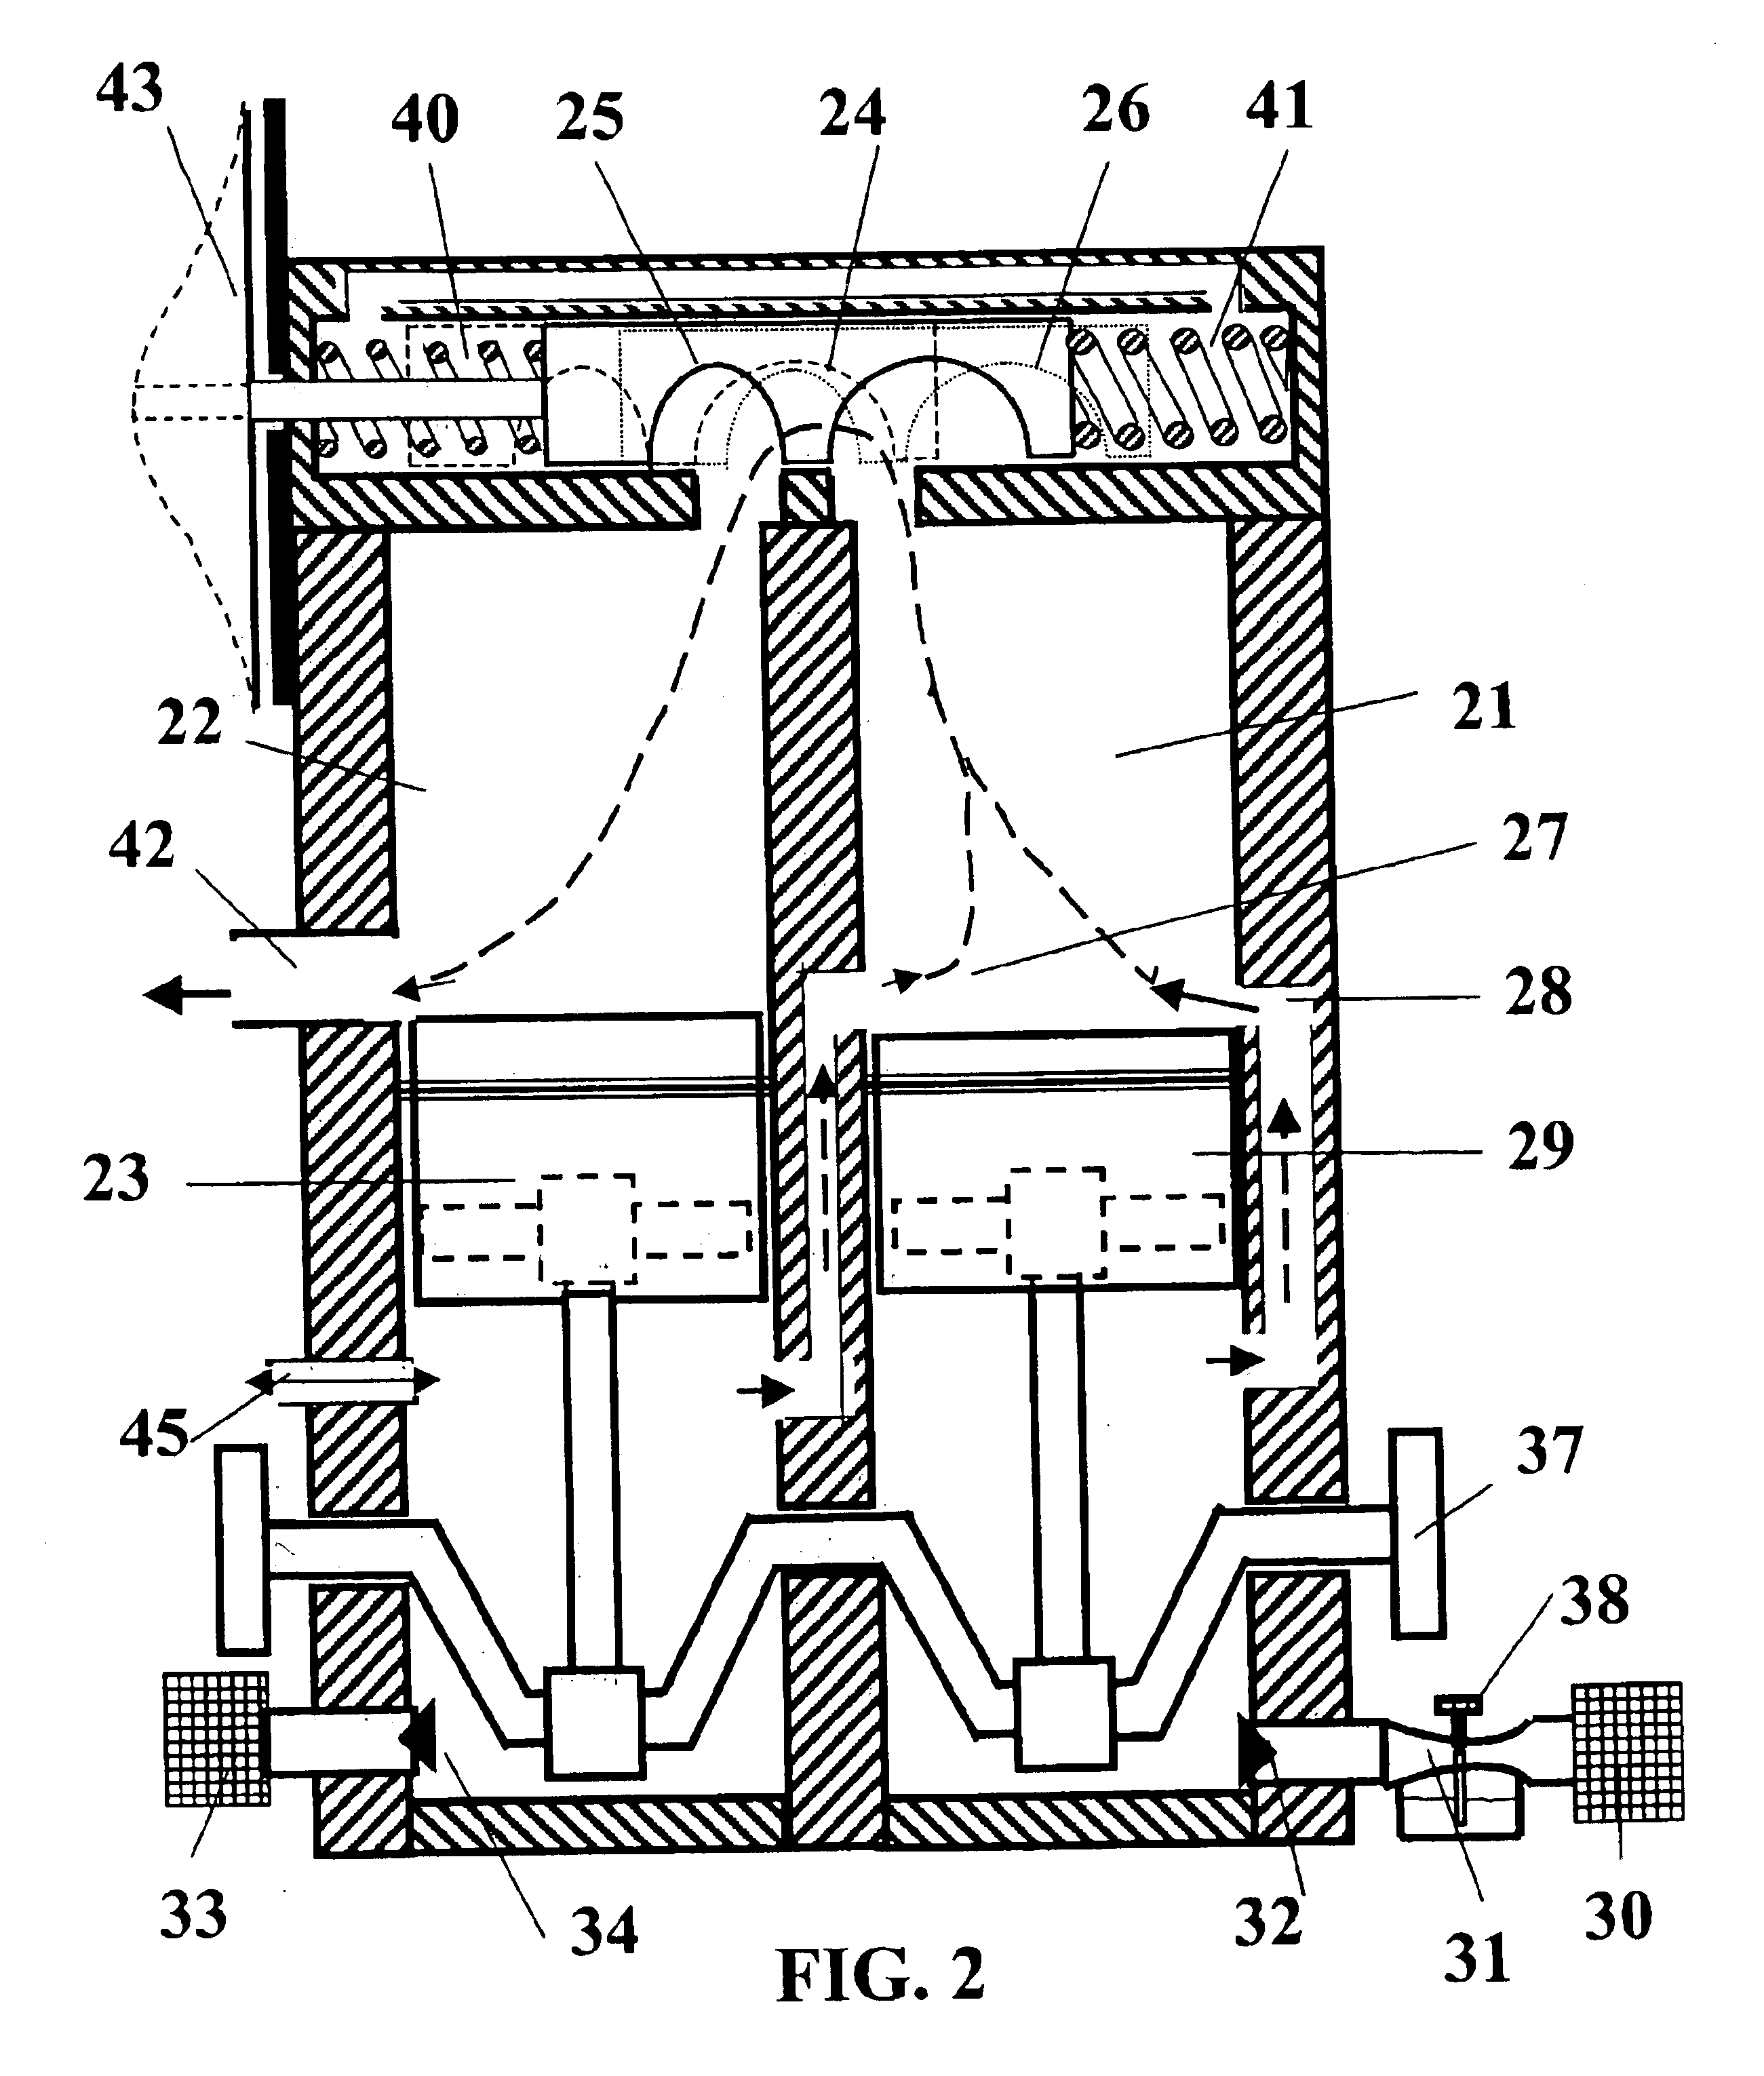 Compression ignition by air injection cycle and engine